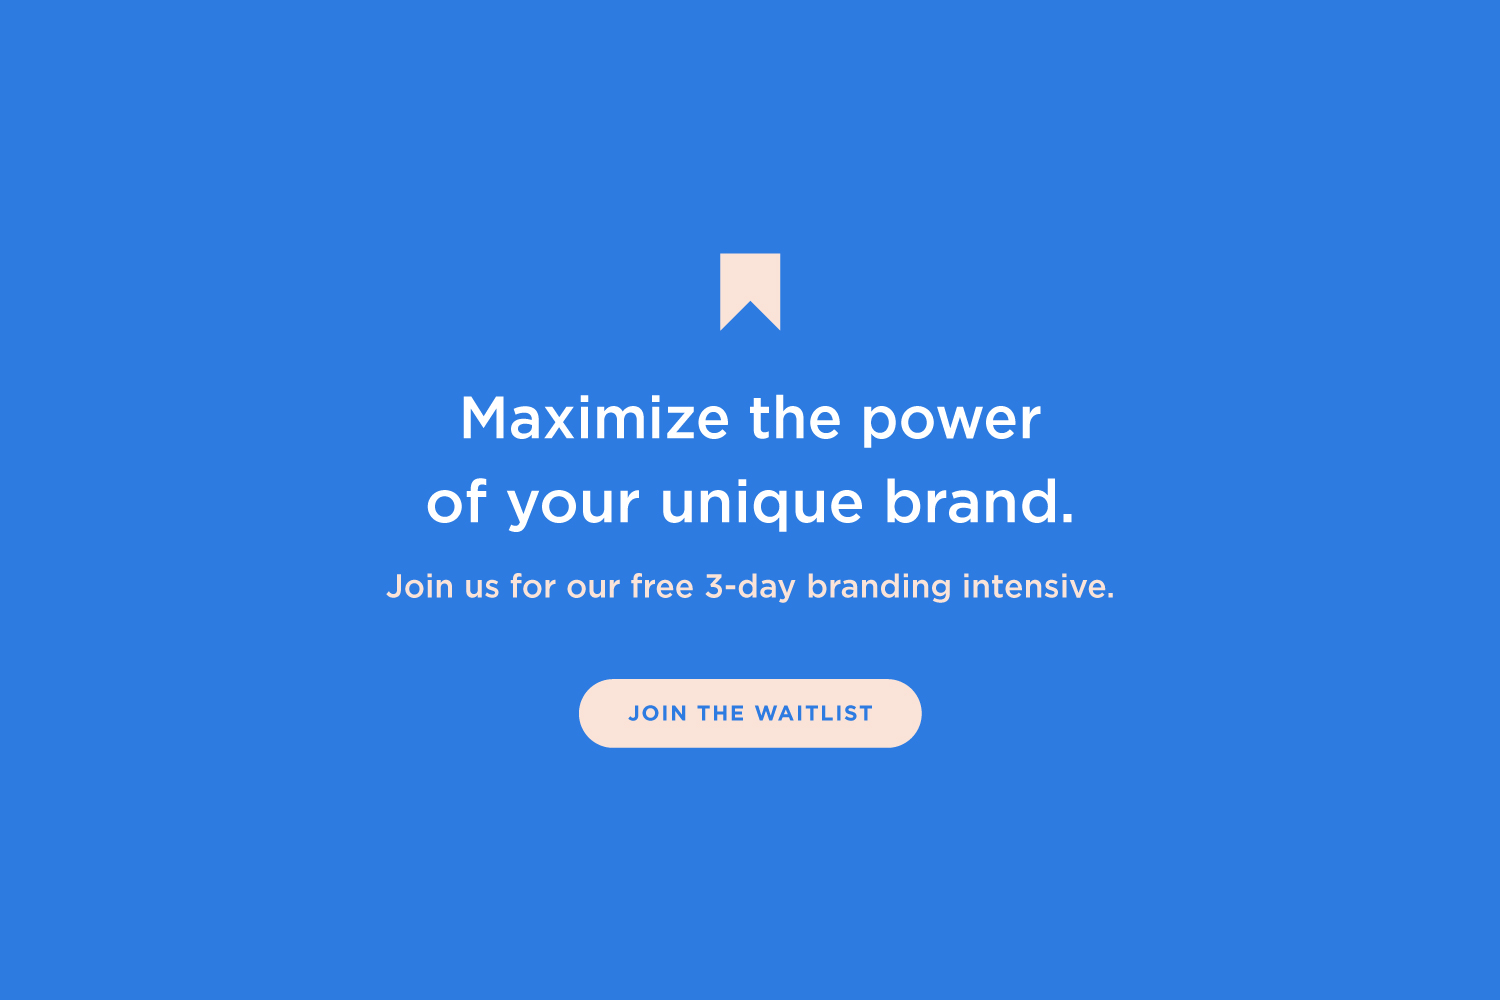 Sign up for free 3-day Branding Intensive!